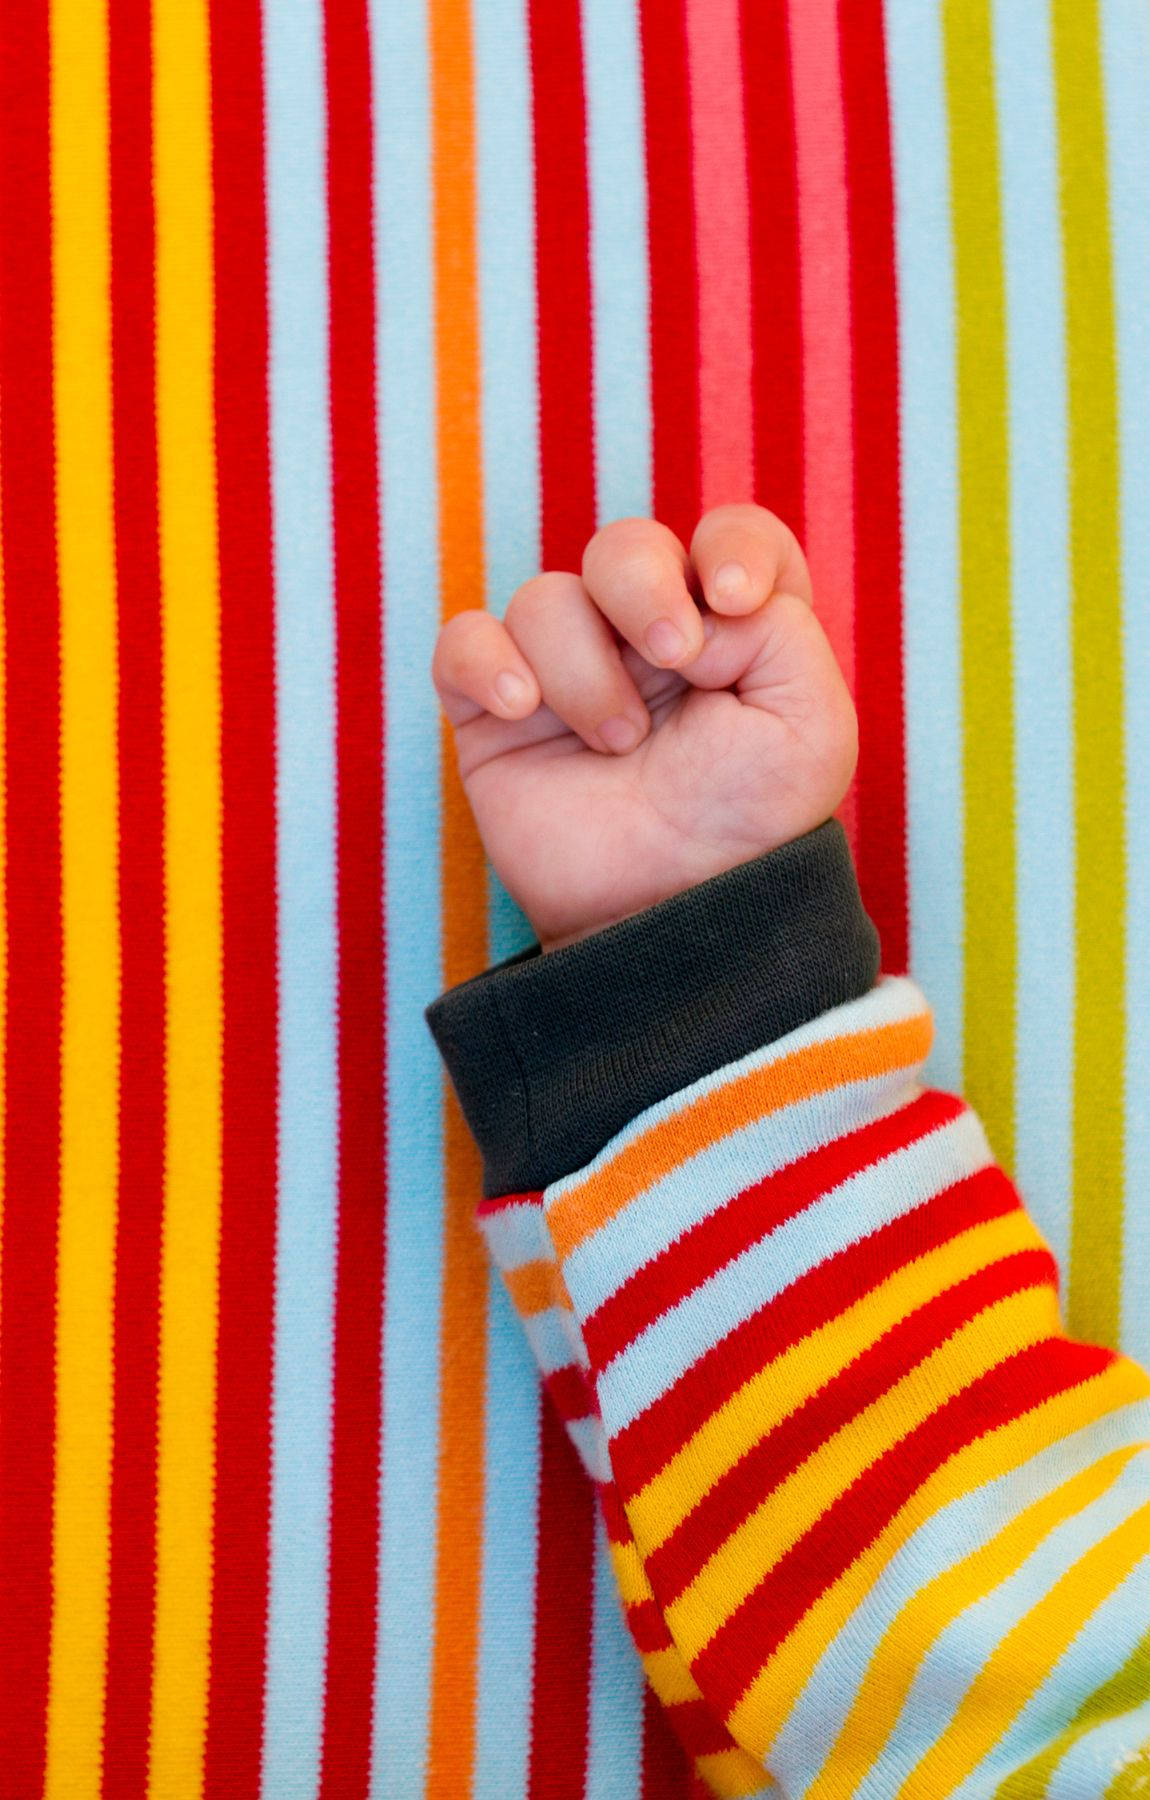 Baby Hand Wearing Colorful Sweater Wallpaper